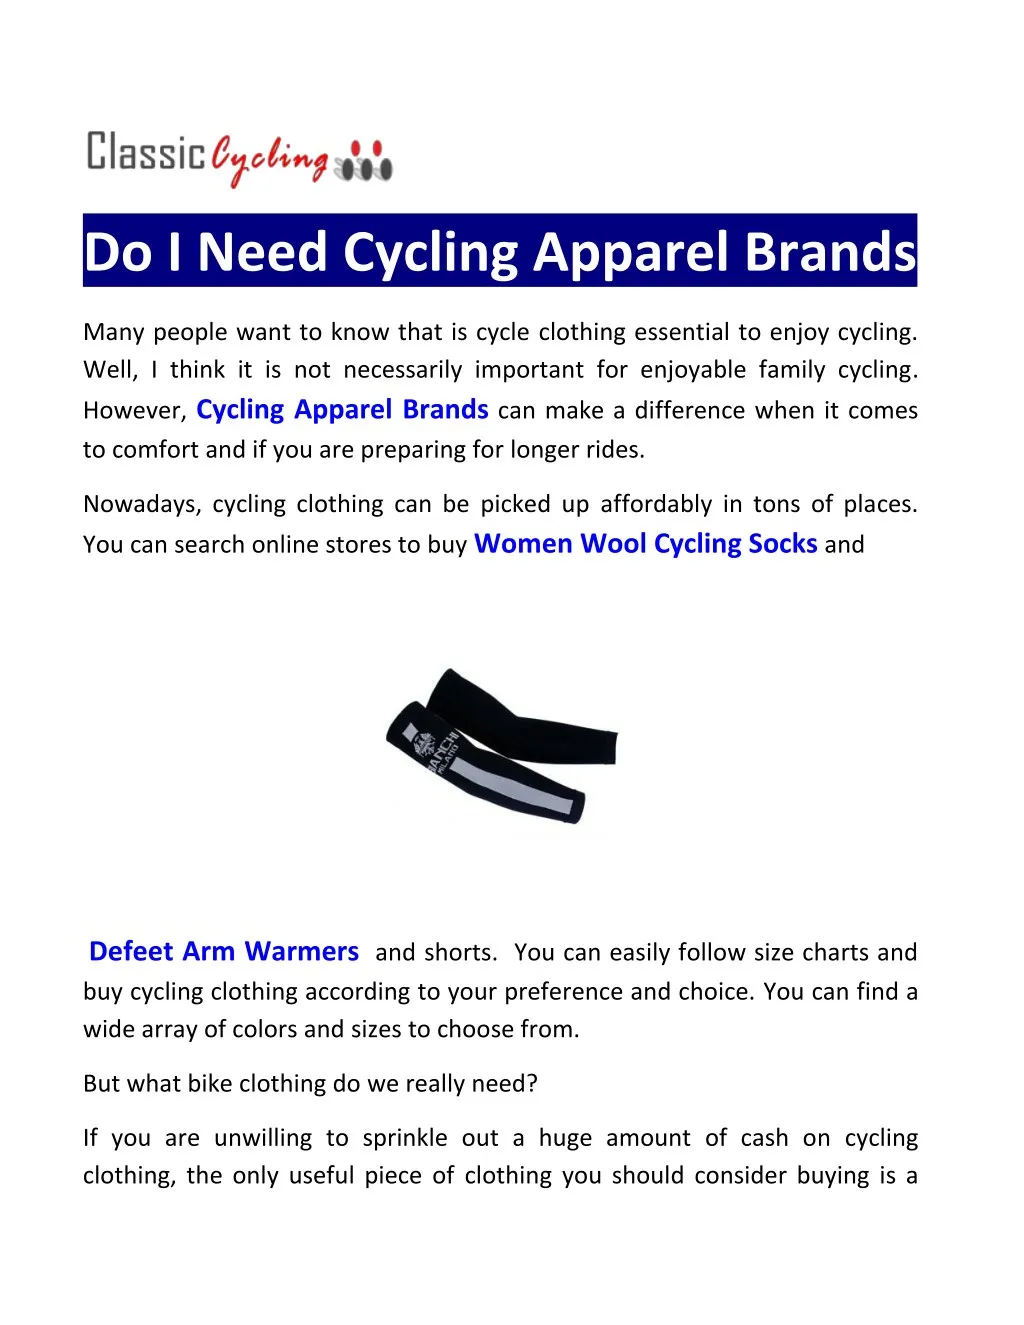 do i need cycling apparel brands